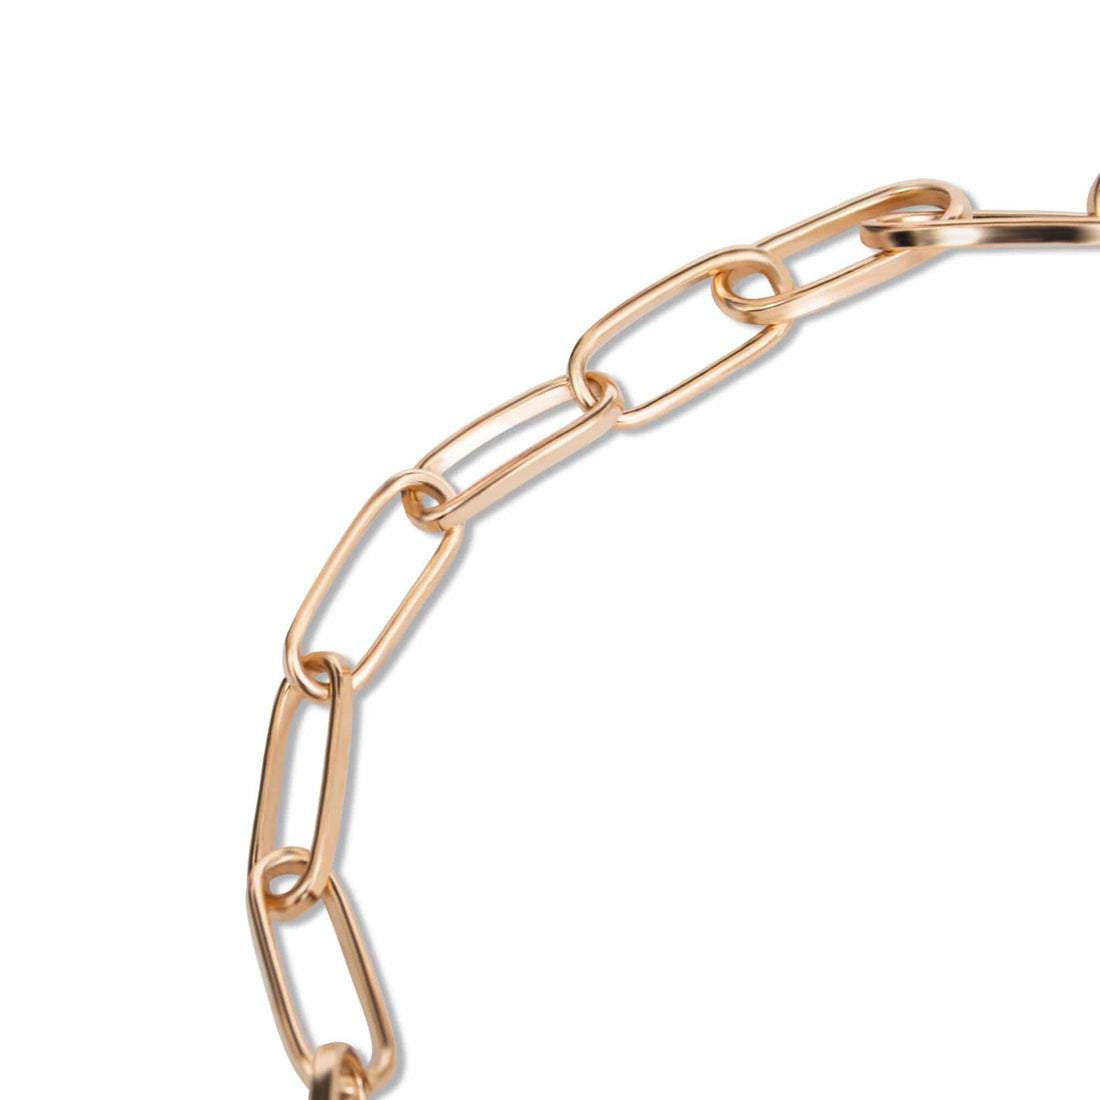 Gold Link Glasses Chain